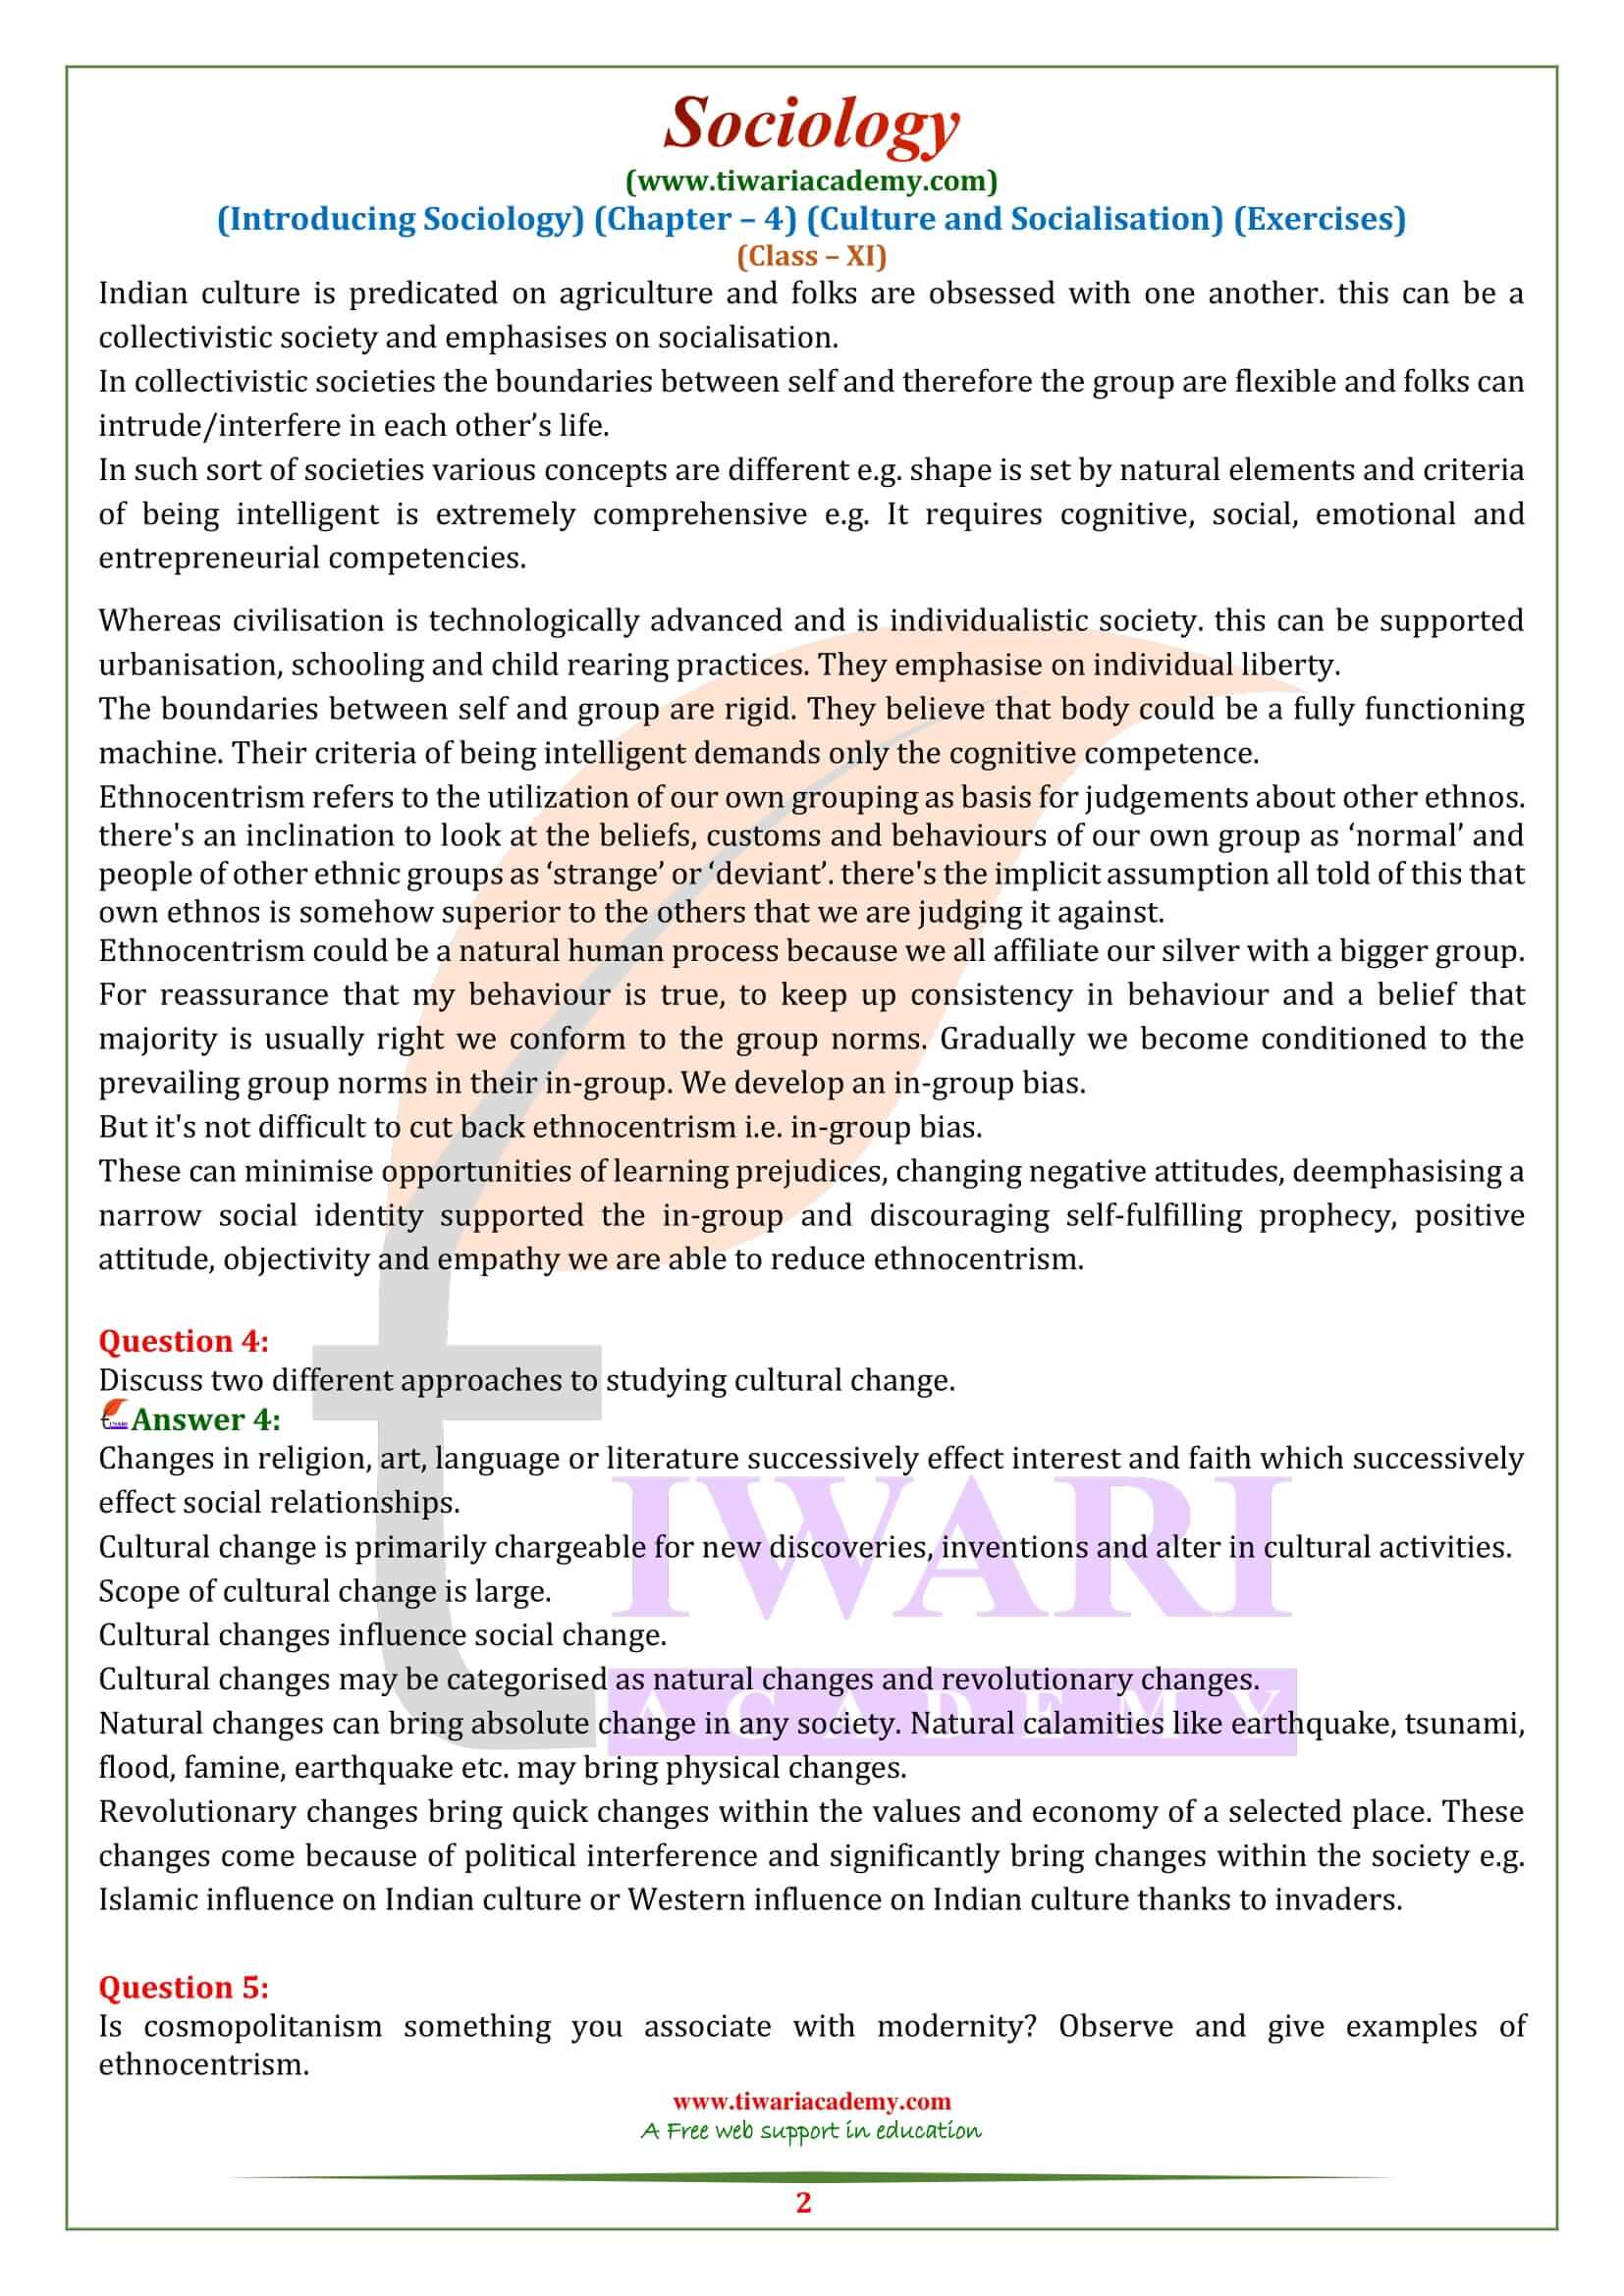 Class 11 Sociology Chapter 4 Culture and Socialisation